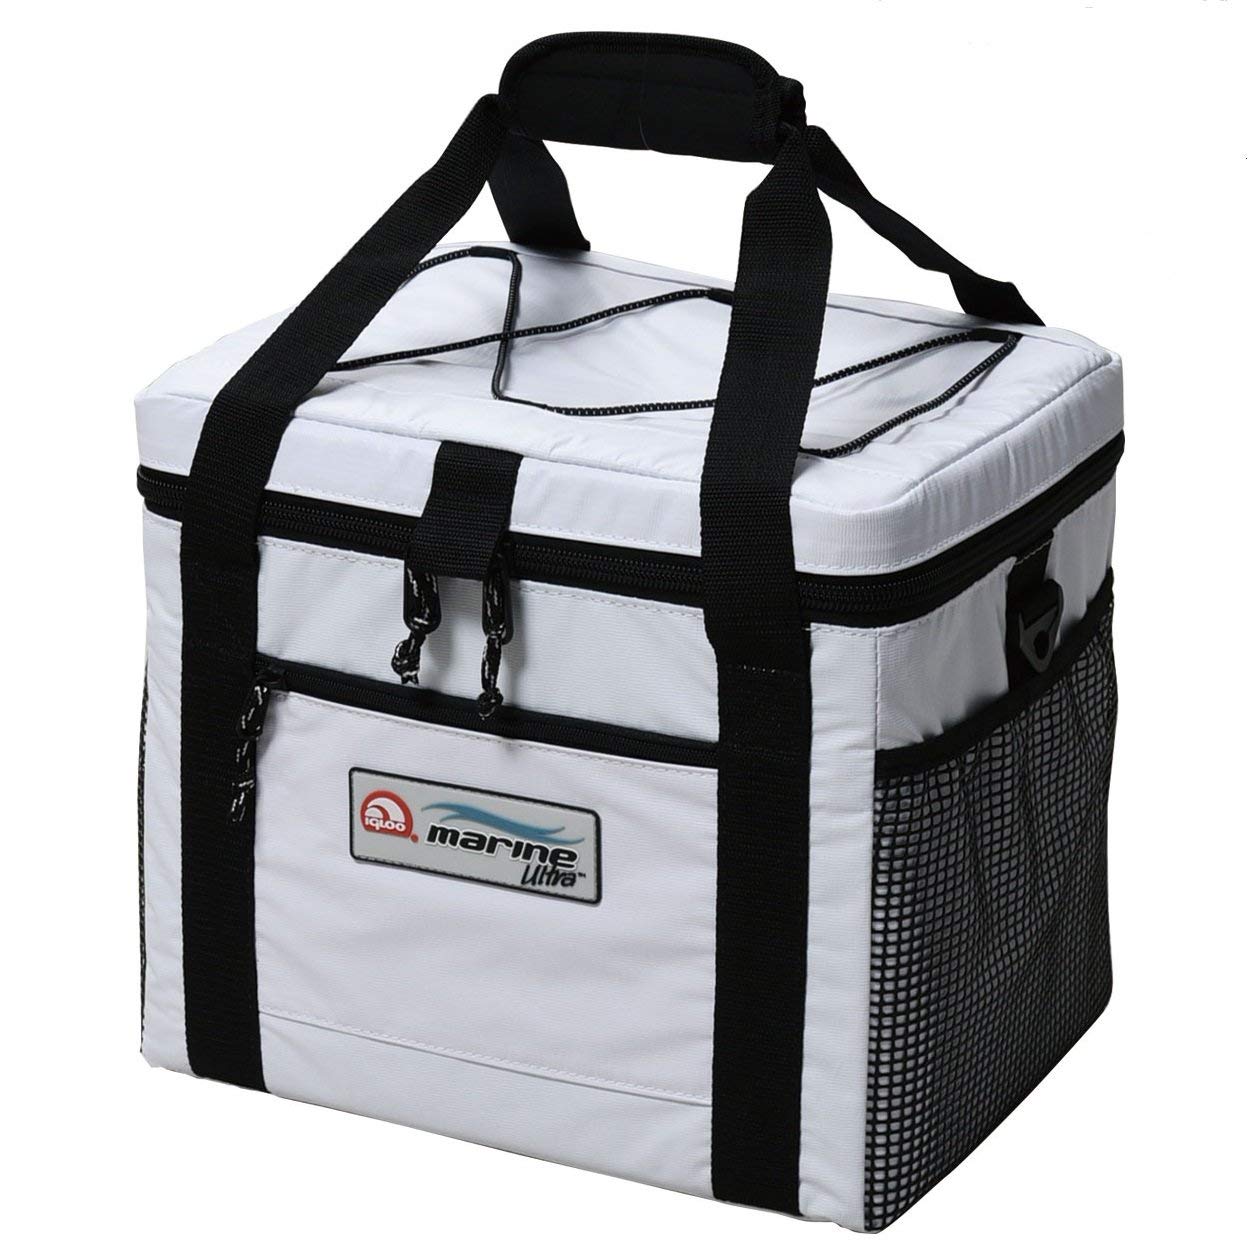 Igloo Marine Ultra 24-Can Square Cooler - $24.99 - Best ...